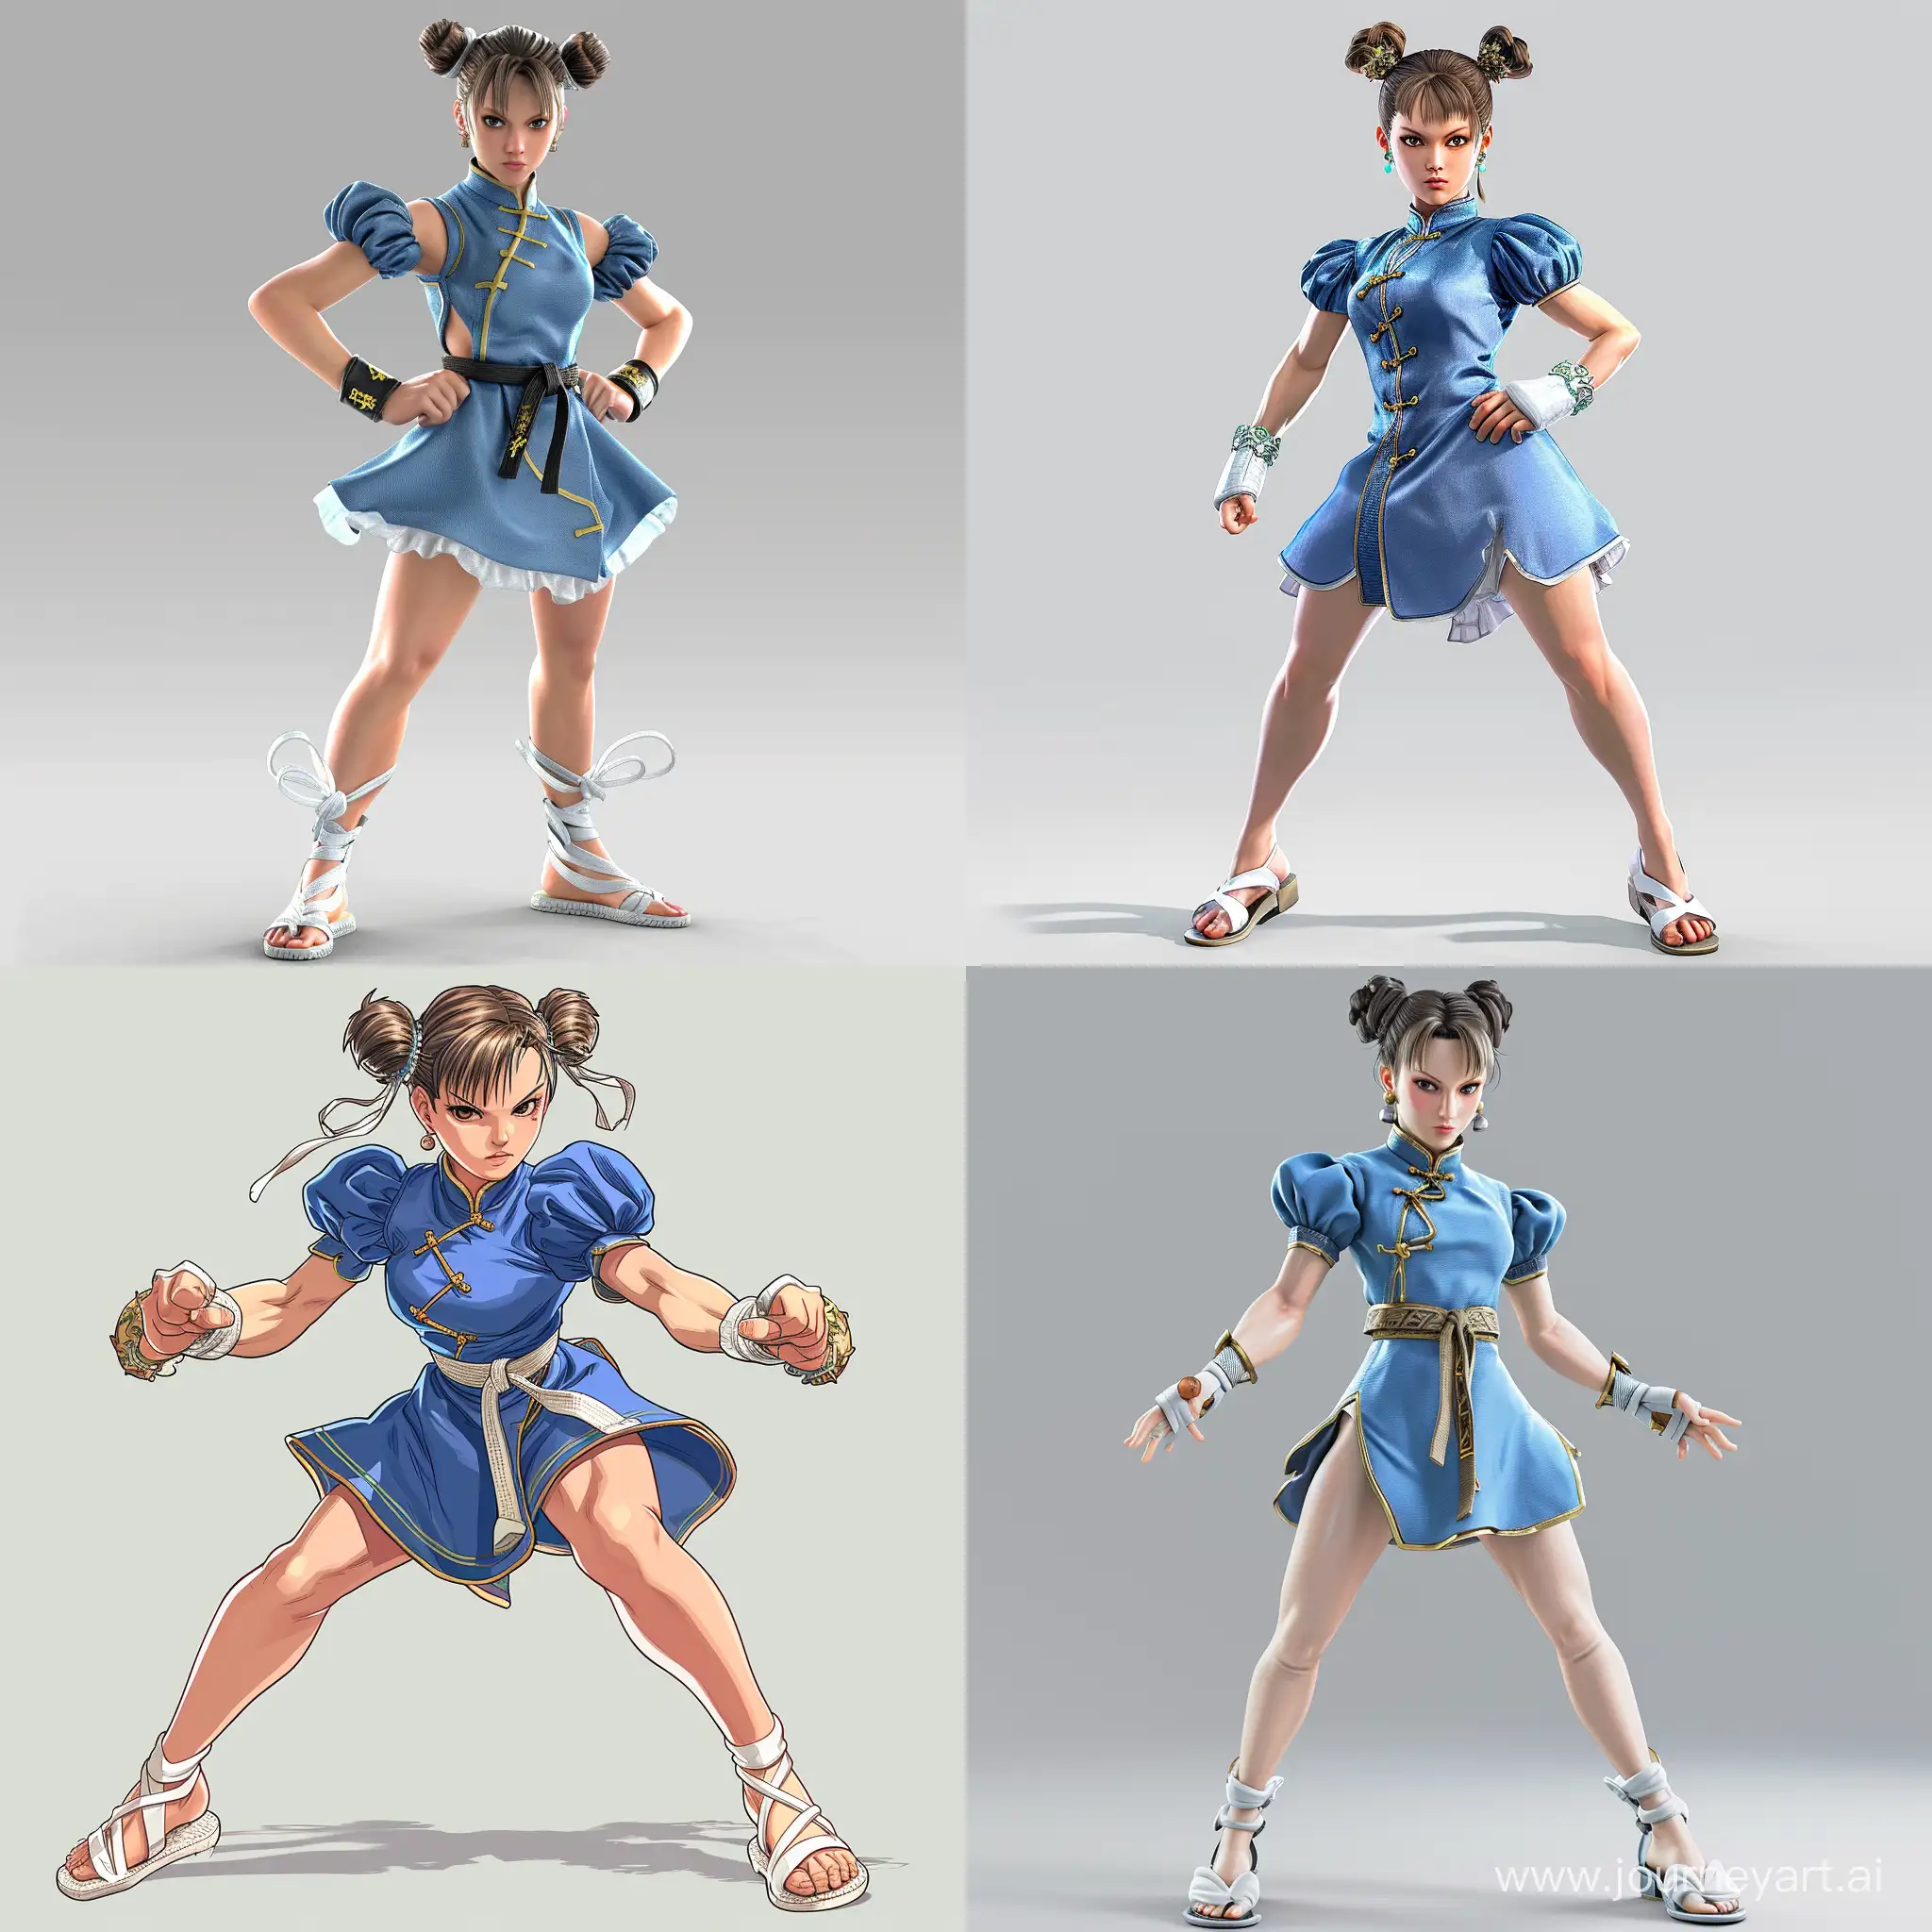 ChunLi-Street-Fighter-Character-in-Dynamic-Pose-Wearing-Blue-Qipao